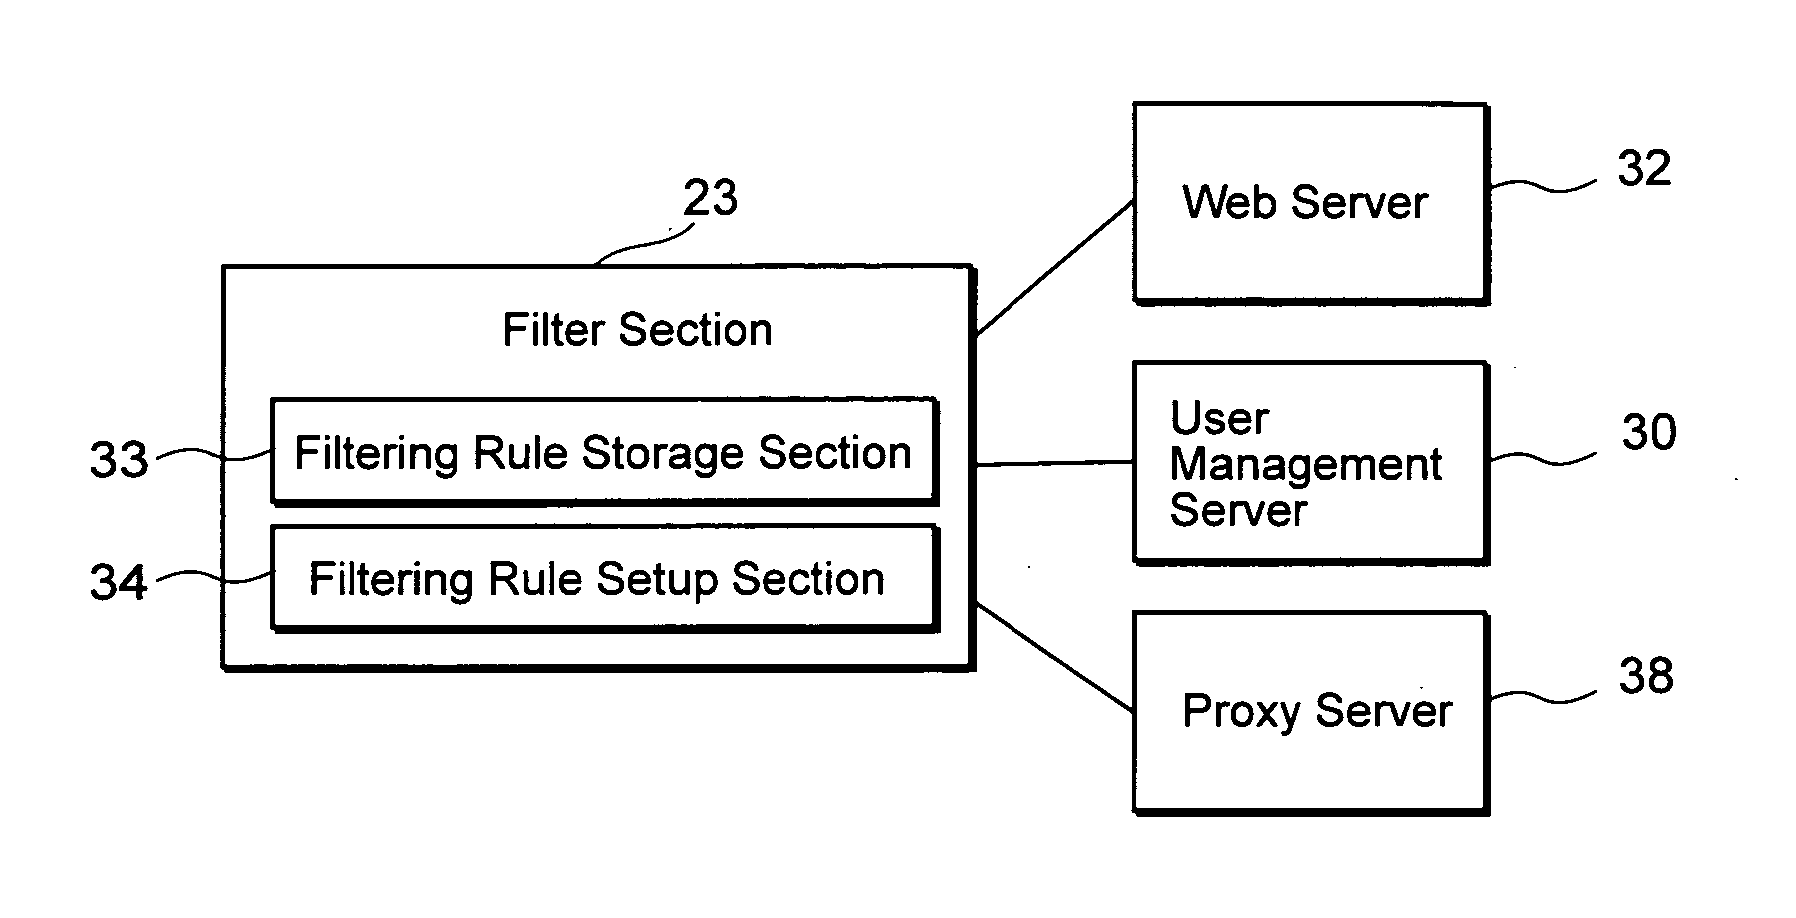 System for the internet connections, and server for routing connections to a client machine